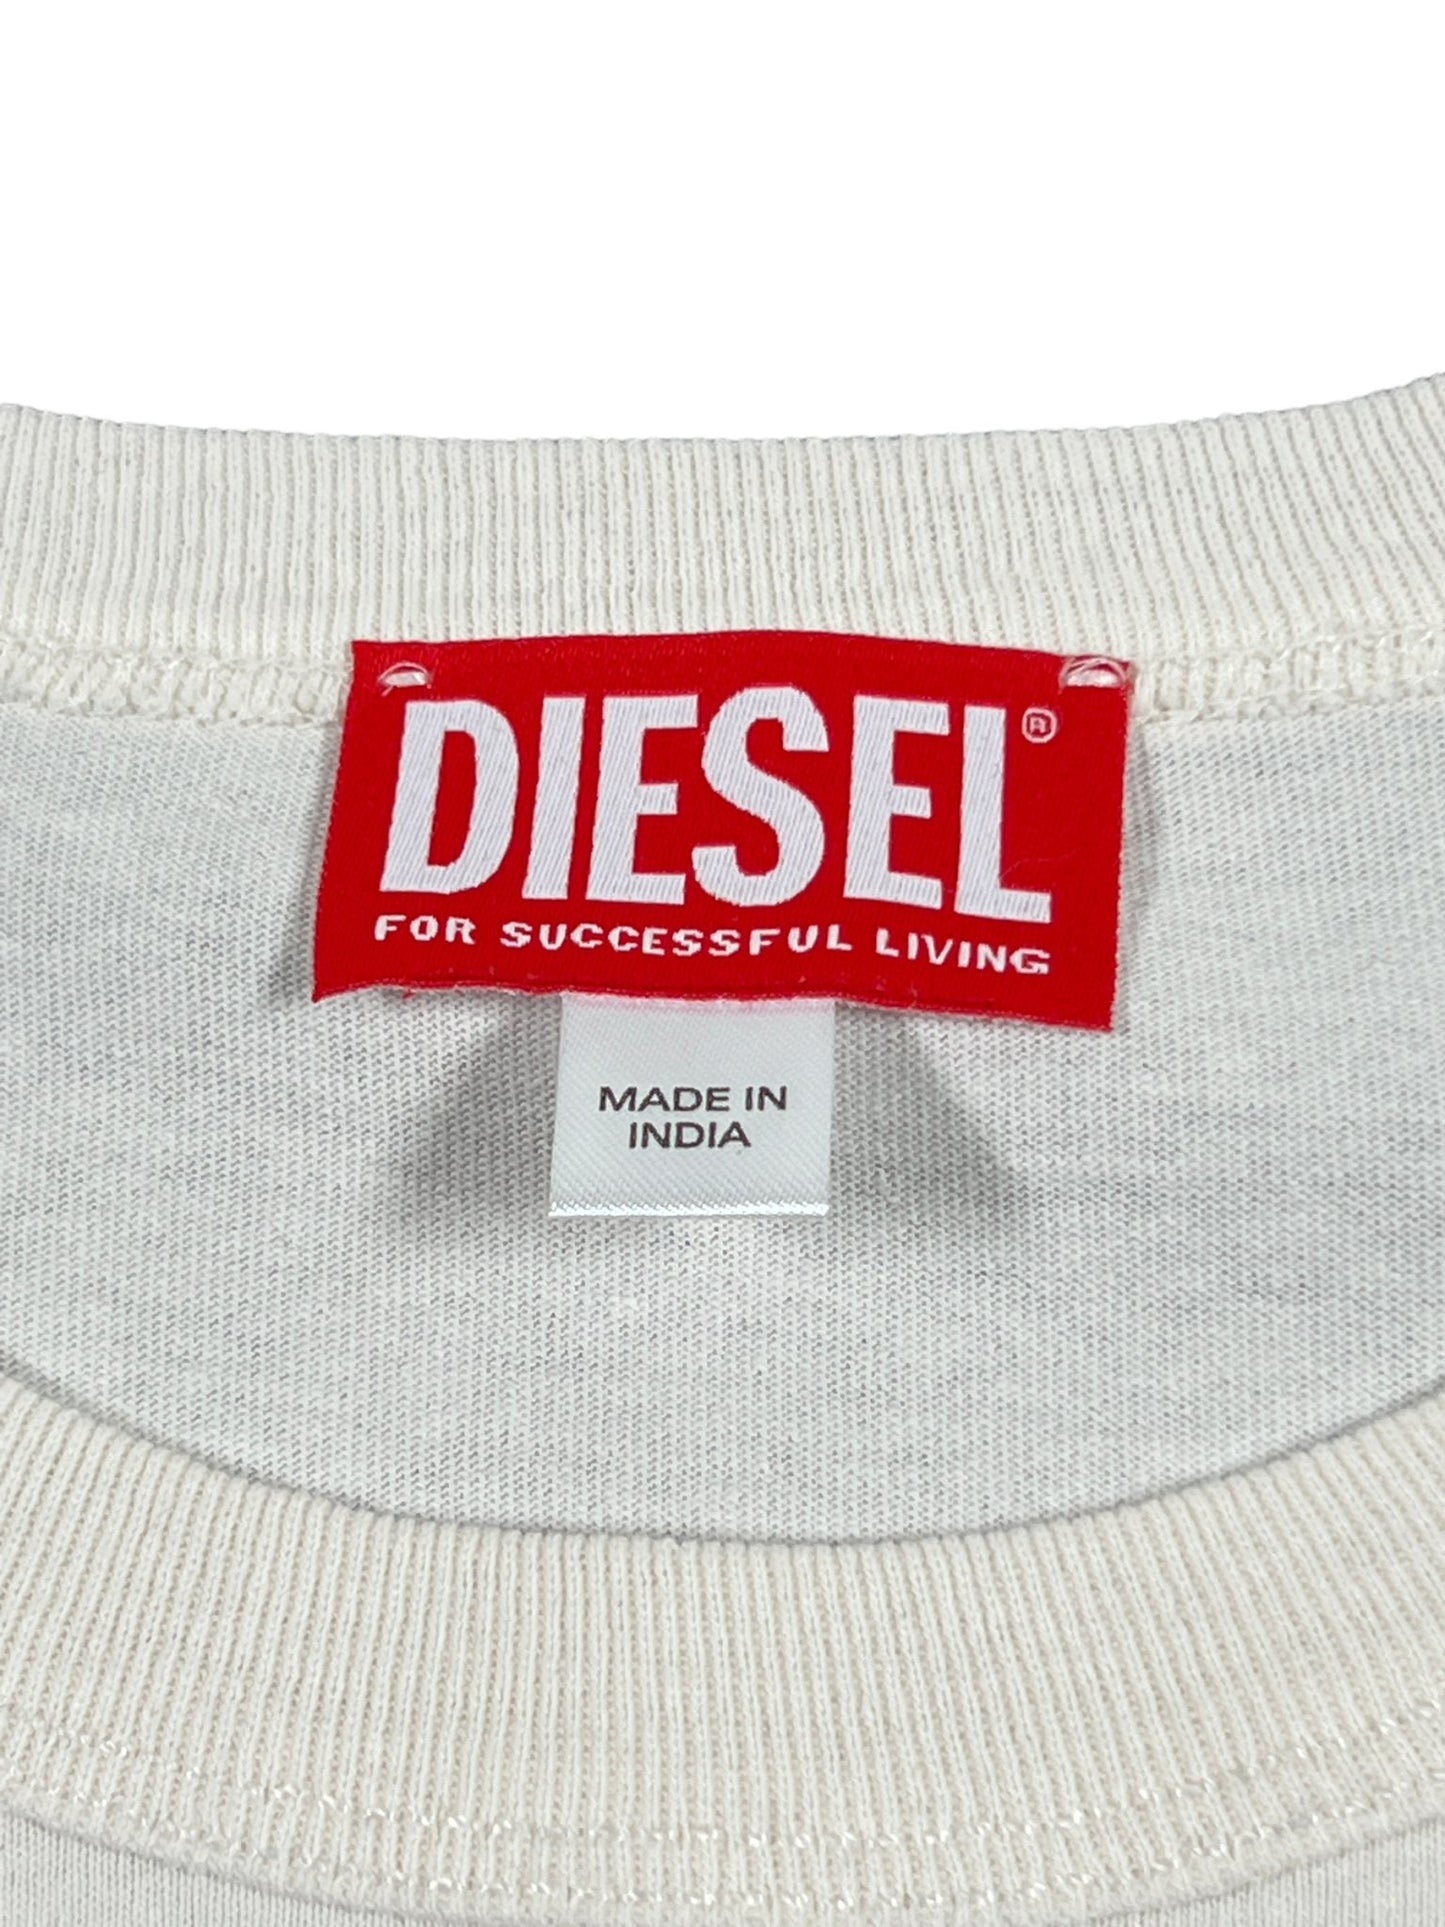 DIESEL T-JUST-N14 regular-fit tee label on a white organic cotton jersey fabric with a 'made in india' tag below it.